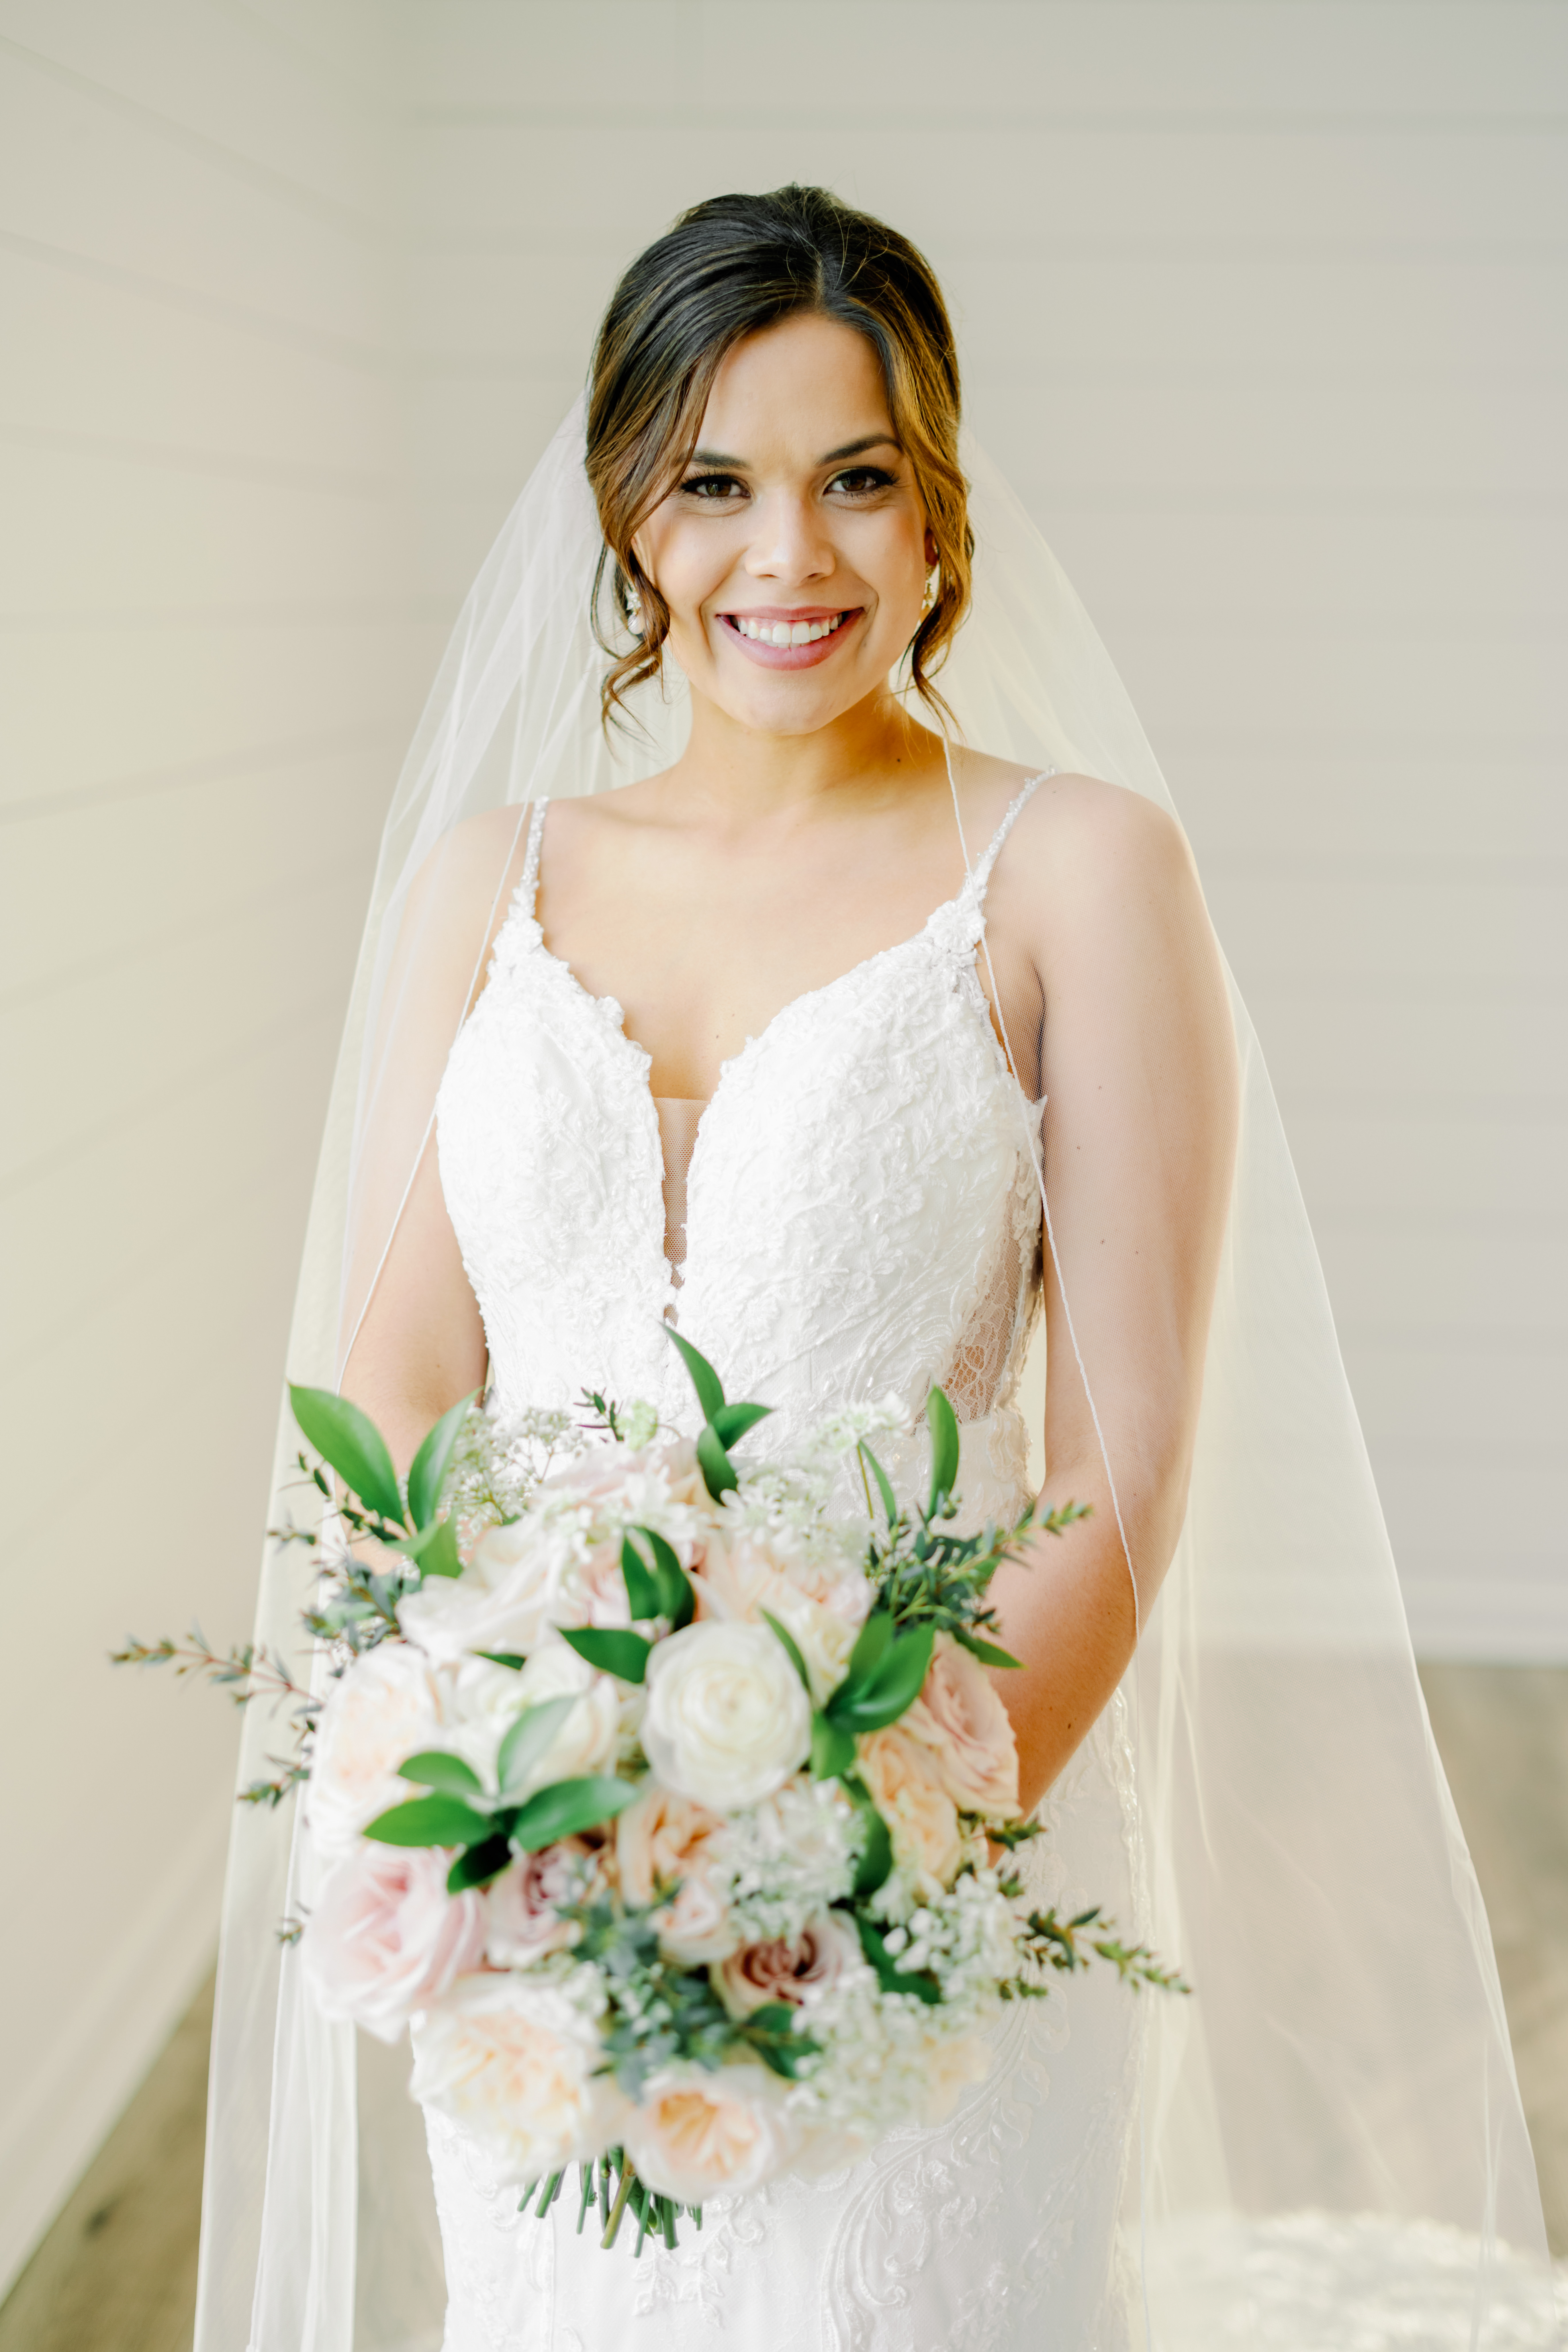 Bride Abbey poses for her bridals with Kati Hewitt Photography in the white chapel at Houston's The Farmhouse Wedding Venue